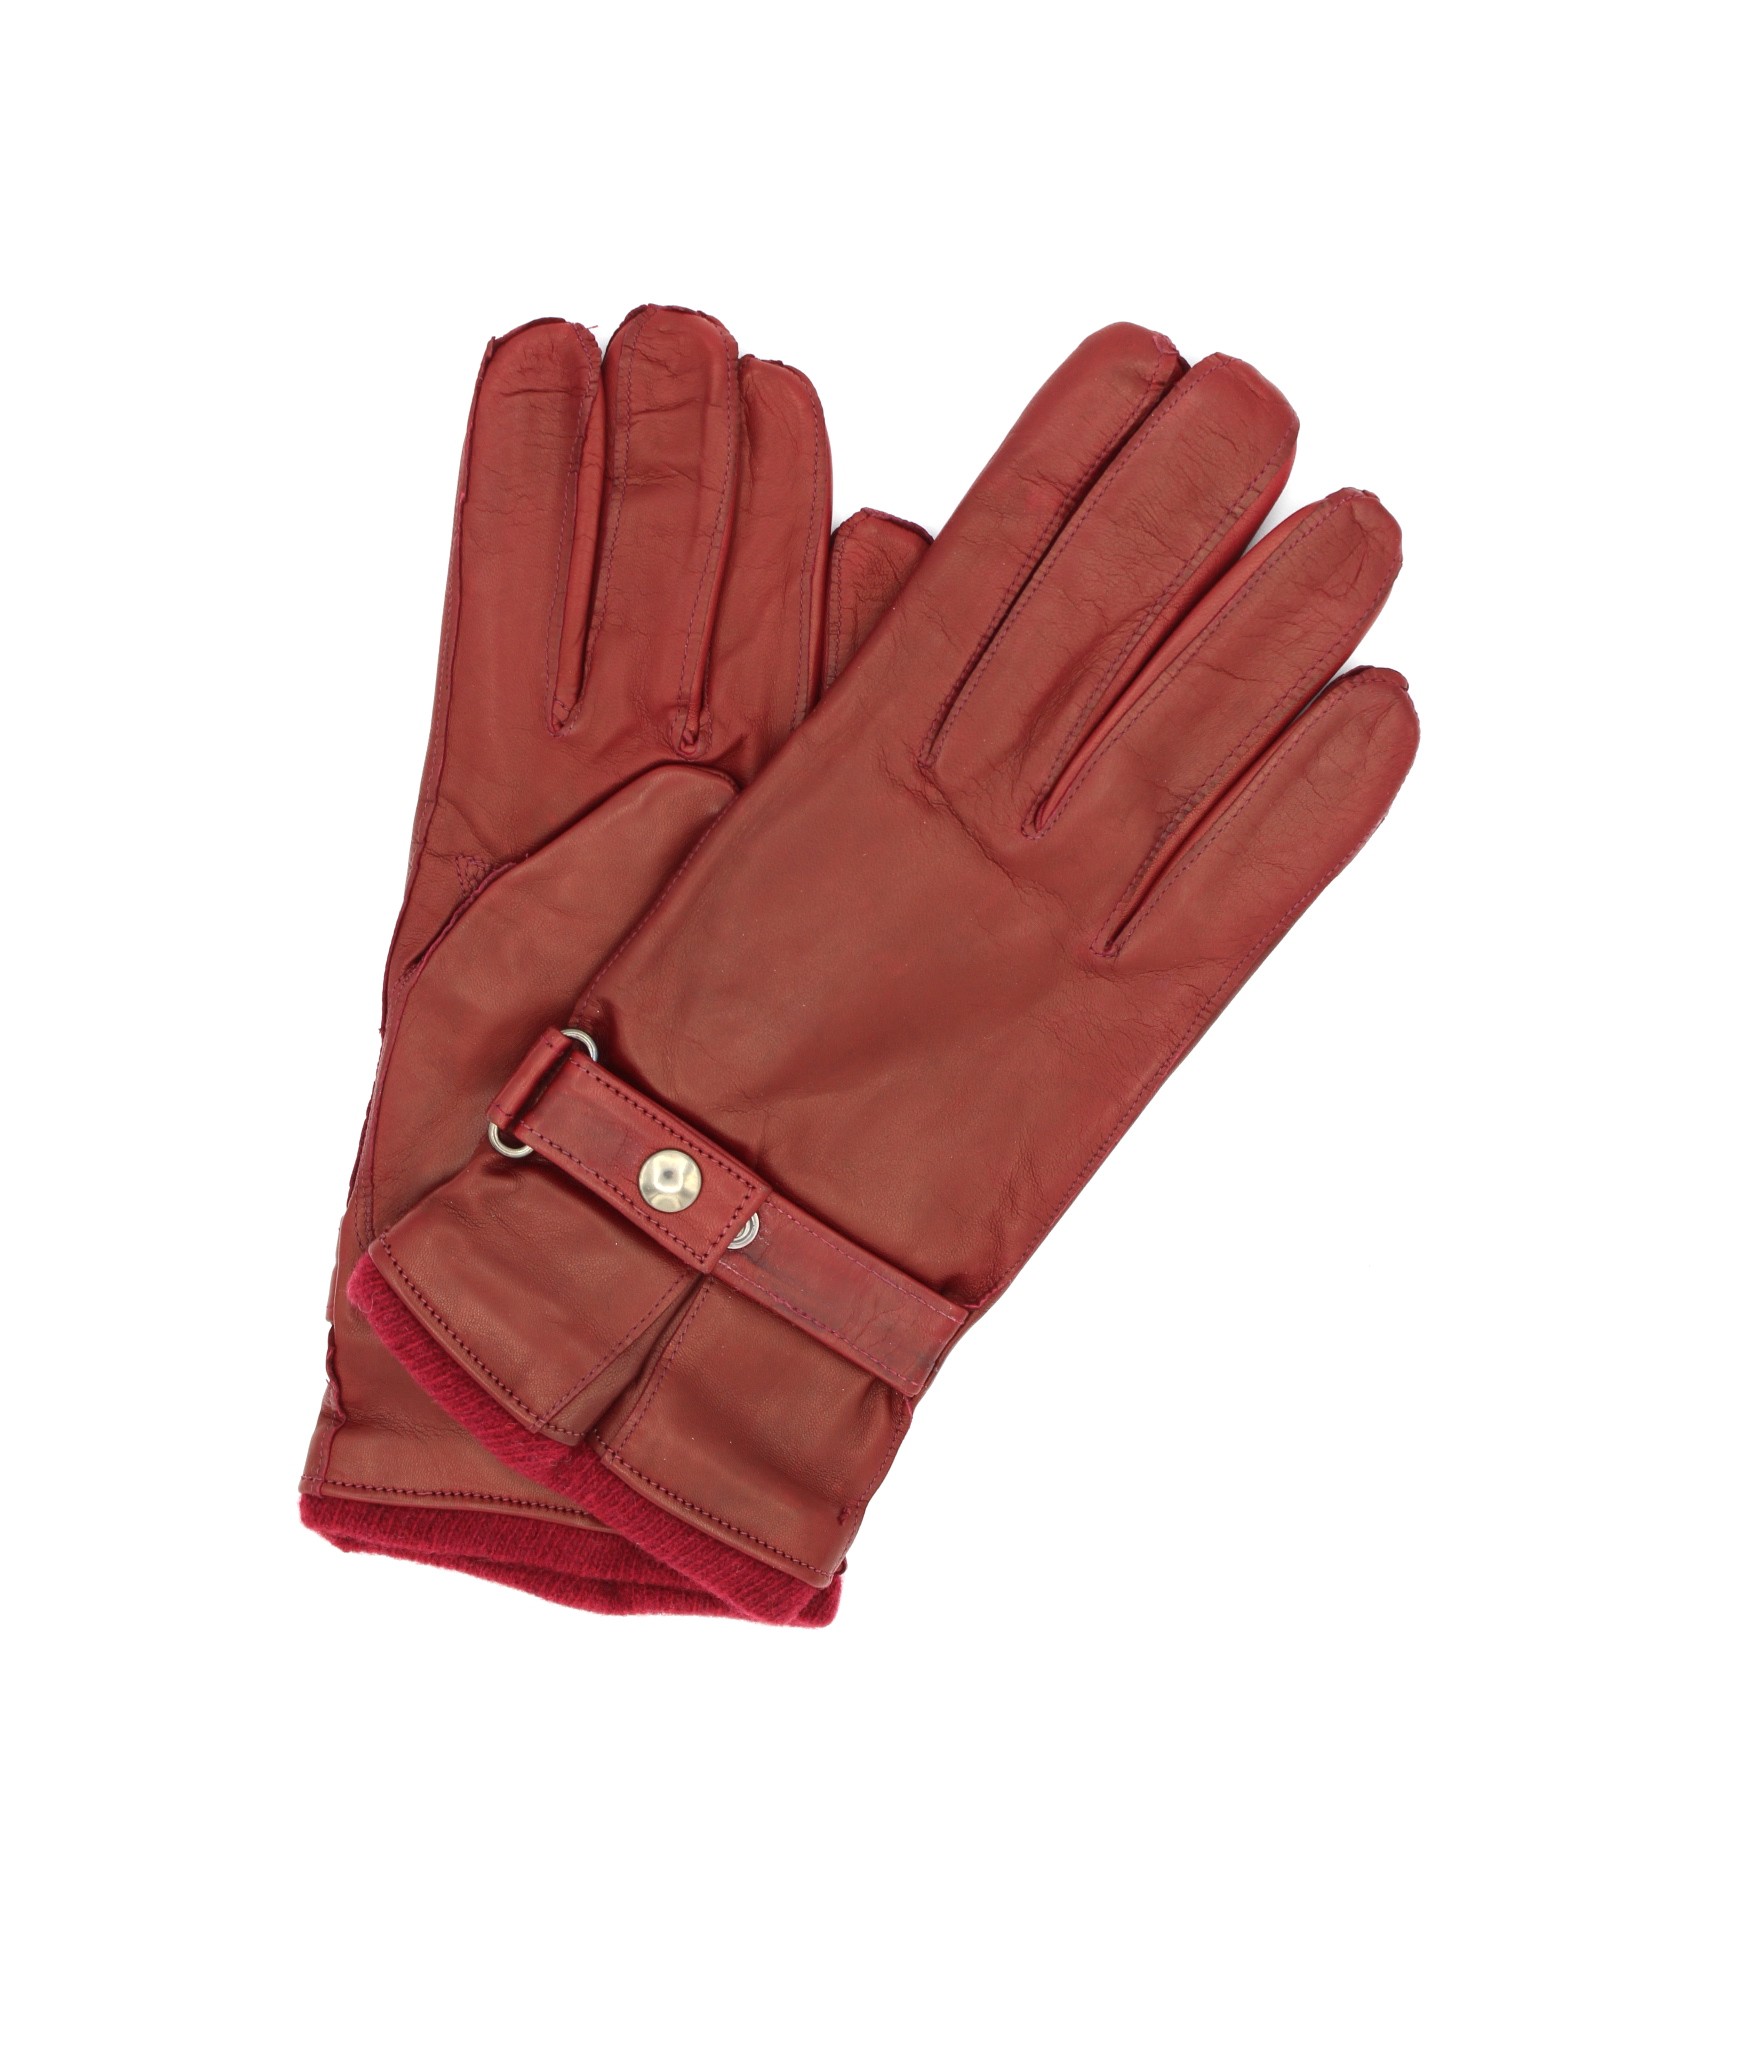 Uomo Fashion Nappa leather gloves cashmere lined with strap